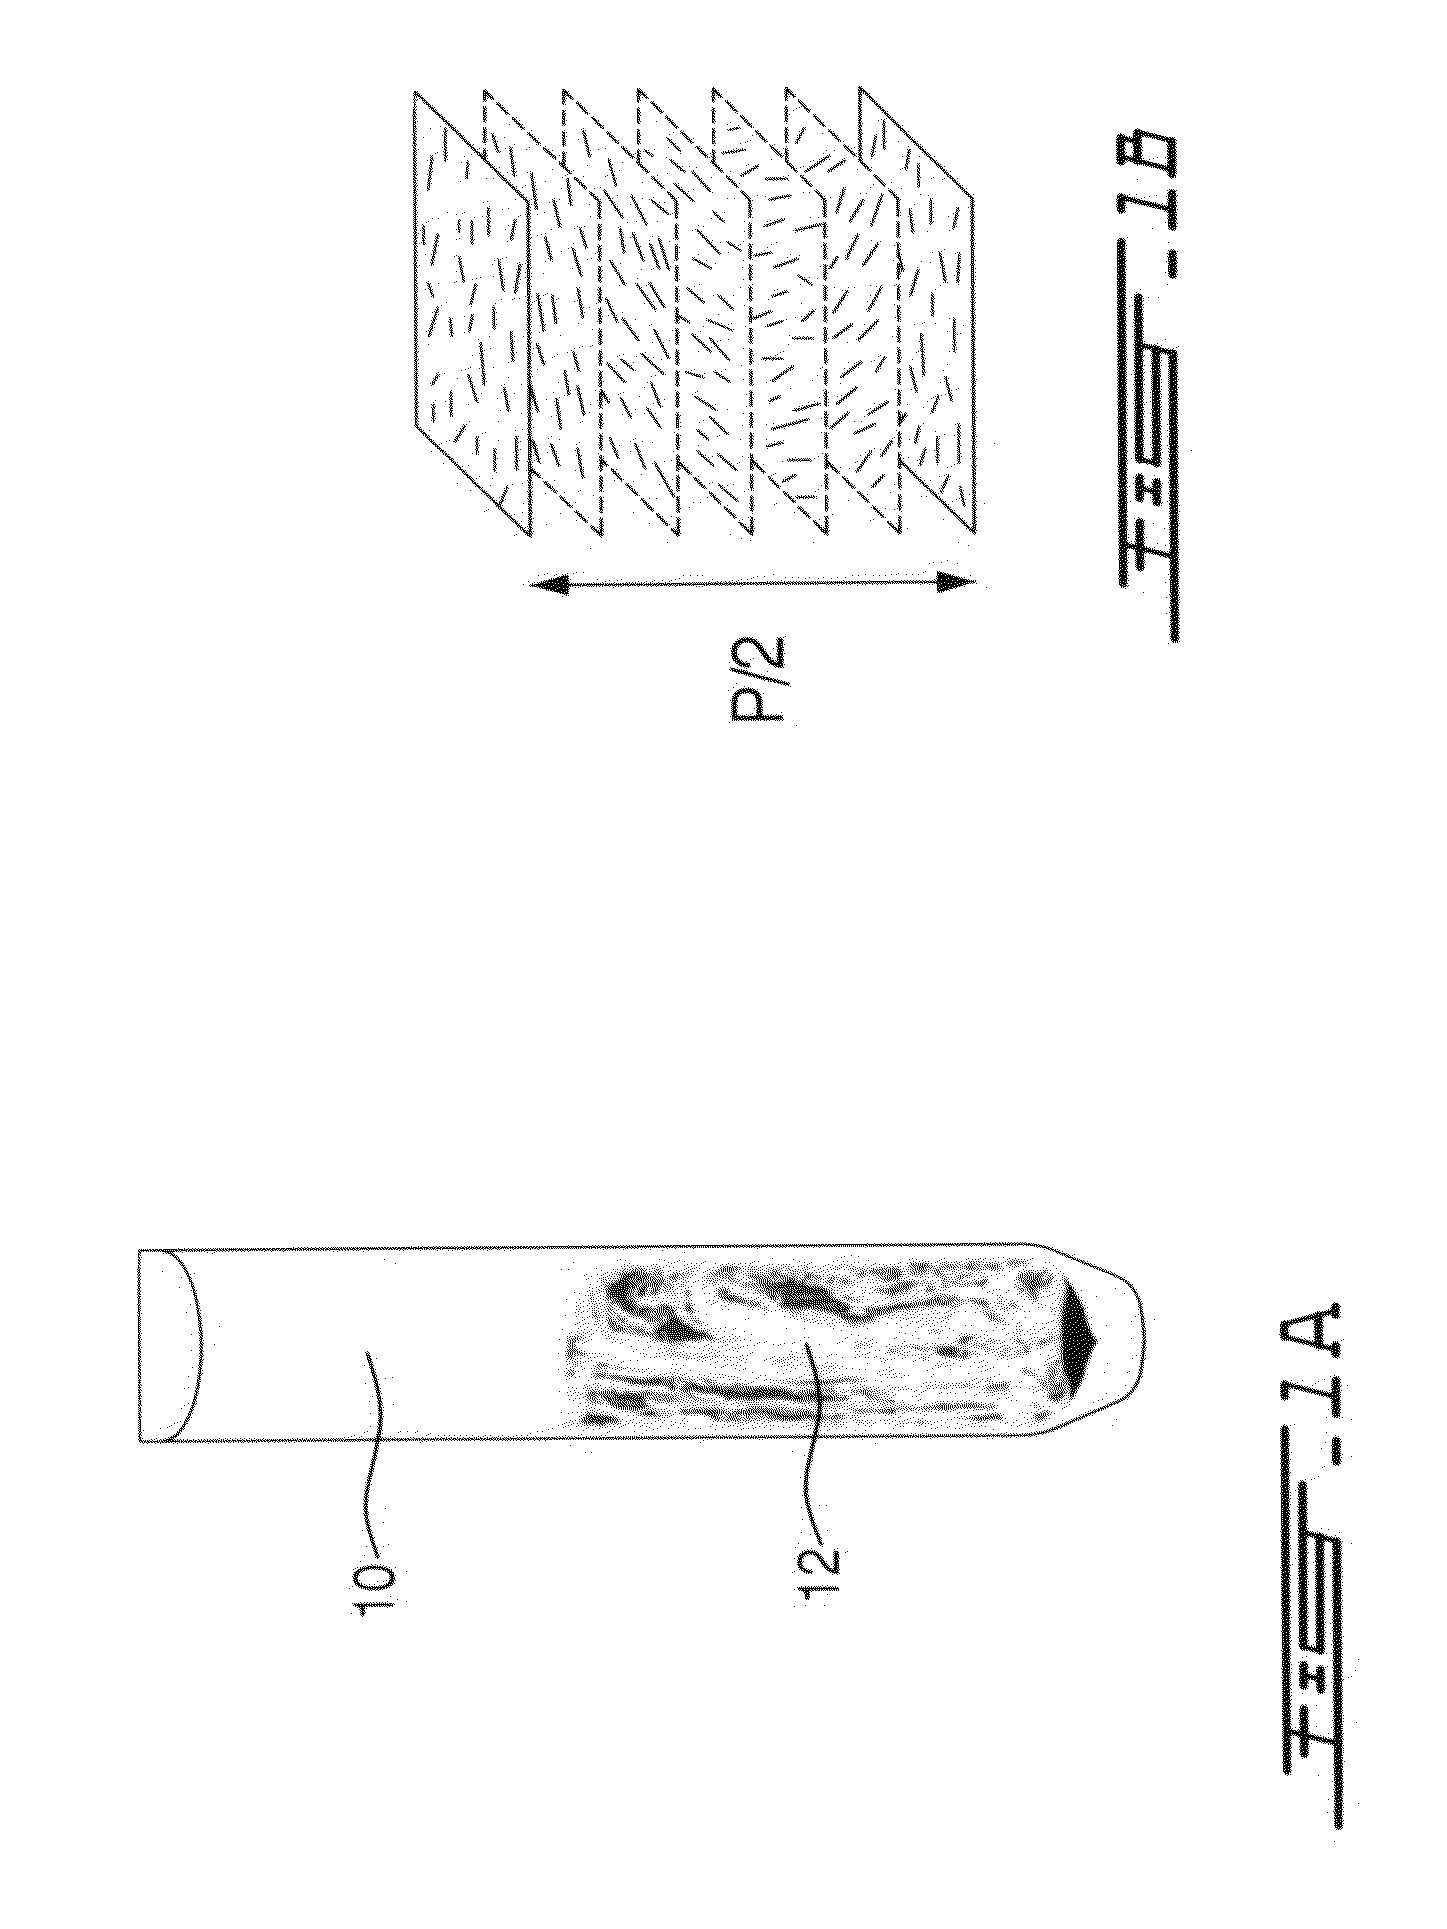 Method for producing iridescent solid nanocrystalline cellulose films incorporating patterns